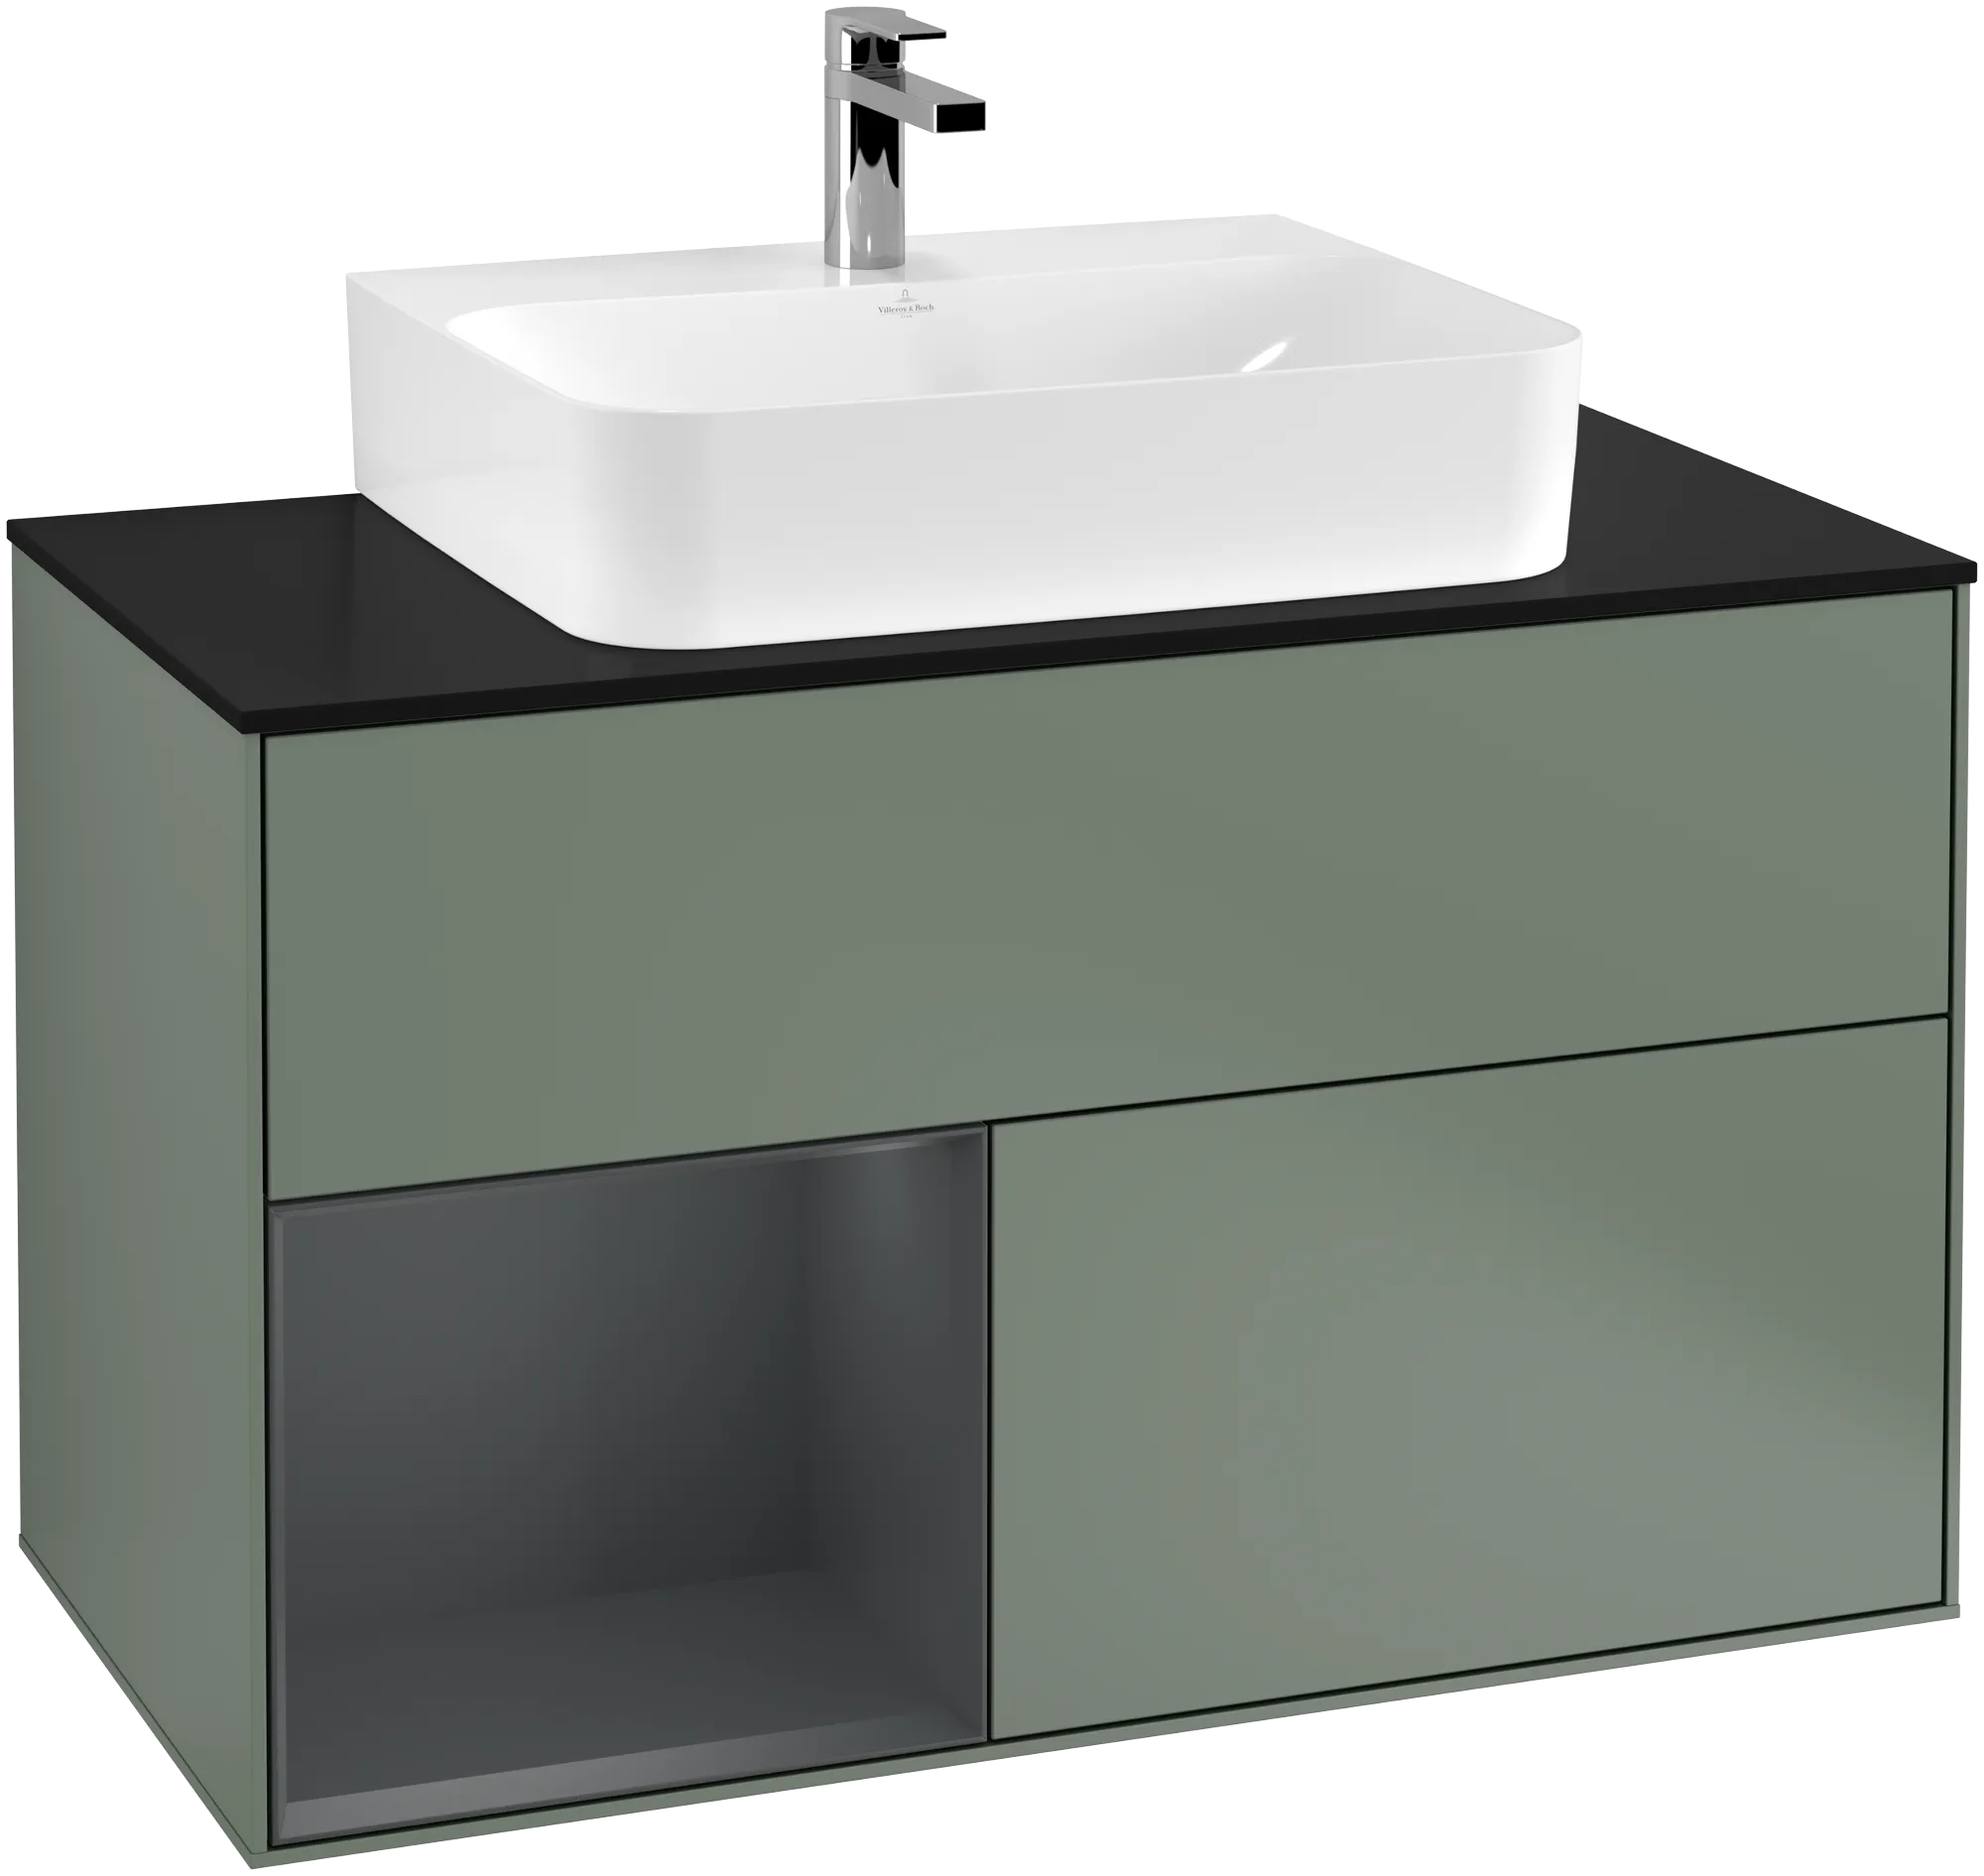 Picture of VILLEROY BOCH Finion Vanity unit, with lighting, 2 pull-out compartments, 1000 x 603 x 501 mm, Olive Matt Lacquer / Midnight Blue Matt Lacquer / Glass Black Matt #G112HGGM